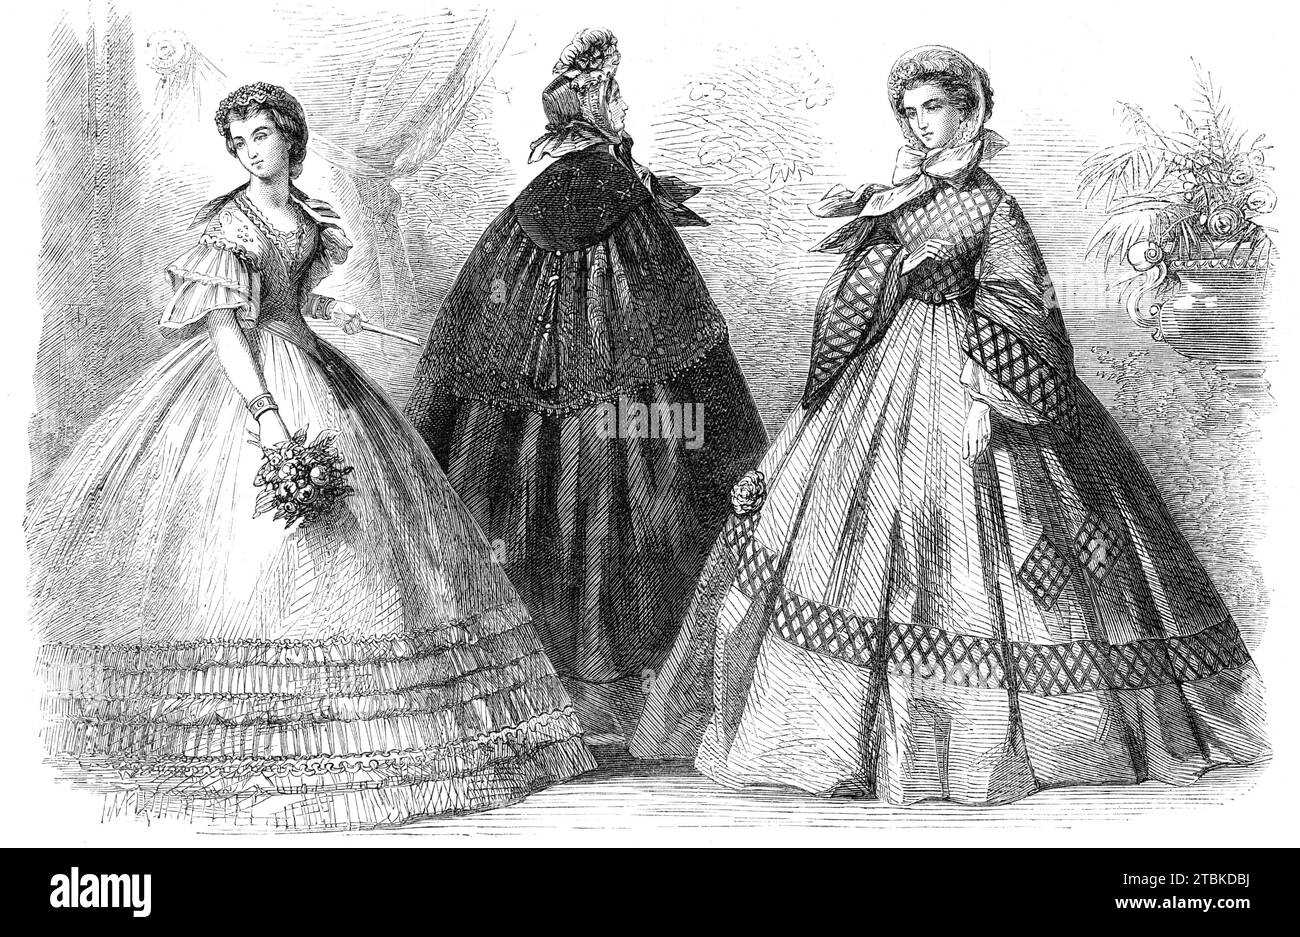 Paris fashions for December, 1861. '1. Dress for an Evening Party. White muslin robe, the skirt ornamented with flounces and bouillonn&#xe9;s deposed alternately. The corsage, rather longwaisted and very pointed, is lownecked and altogether of the Marie Antoinette style...The headdress consists of the couronne Ceres, attached behind by a bow of dark blue ribbons...2. The Etoile Manteau. This elegant cloak is of black velvet...Over the shoulder-piece...completed by a pair of tassels, are distributed a number of passementerie stars (whence the name of the manteau). The bonnet crowning this toile Stock Photo